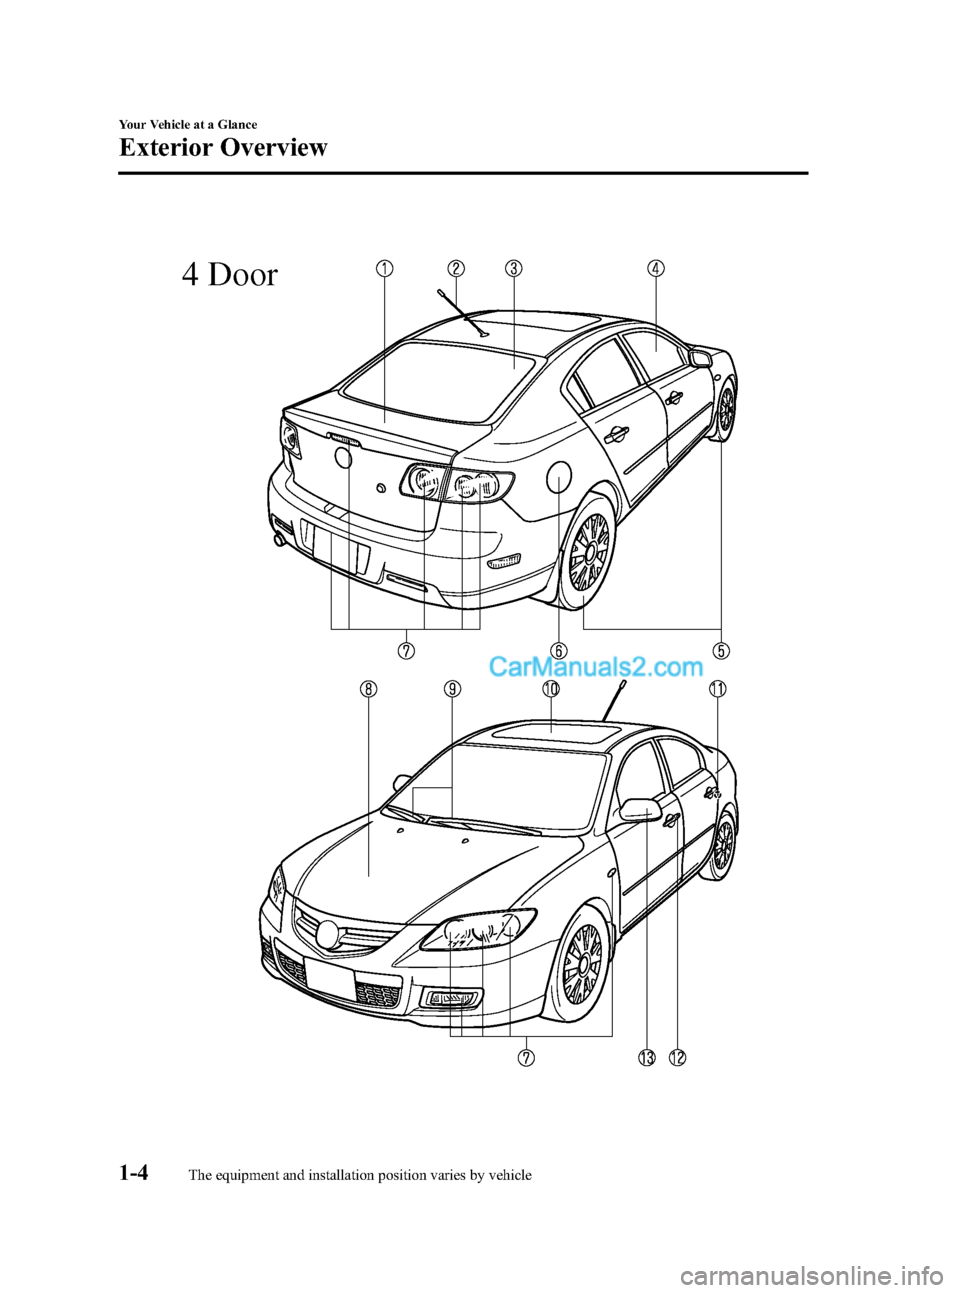 MAZDA MODEL MAZDASPEED 3 2008  Owners Manual (in English) Black plate (10,1)
4 Door
1-4
Your Vehicle at a Glance
The equipment and installation position varies by vehicle
Exterior Overview
Mazda3_8X41-EA-07F_Edition1 Page10
Wednesday, April 25 2007 1:4 PM
Fo